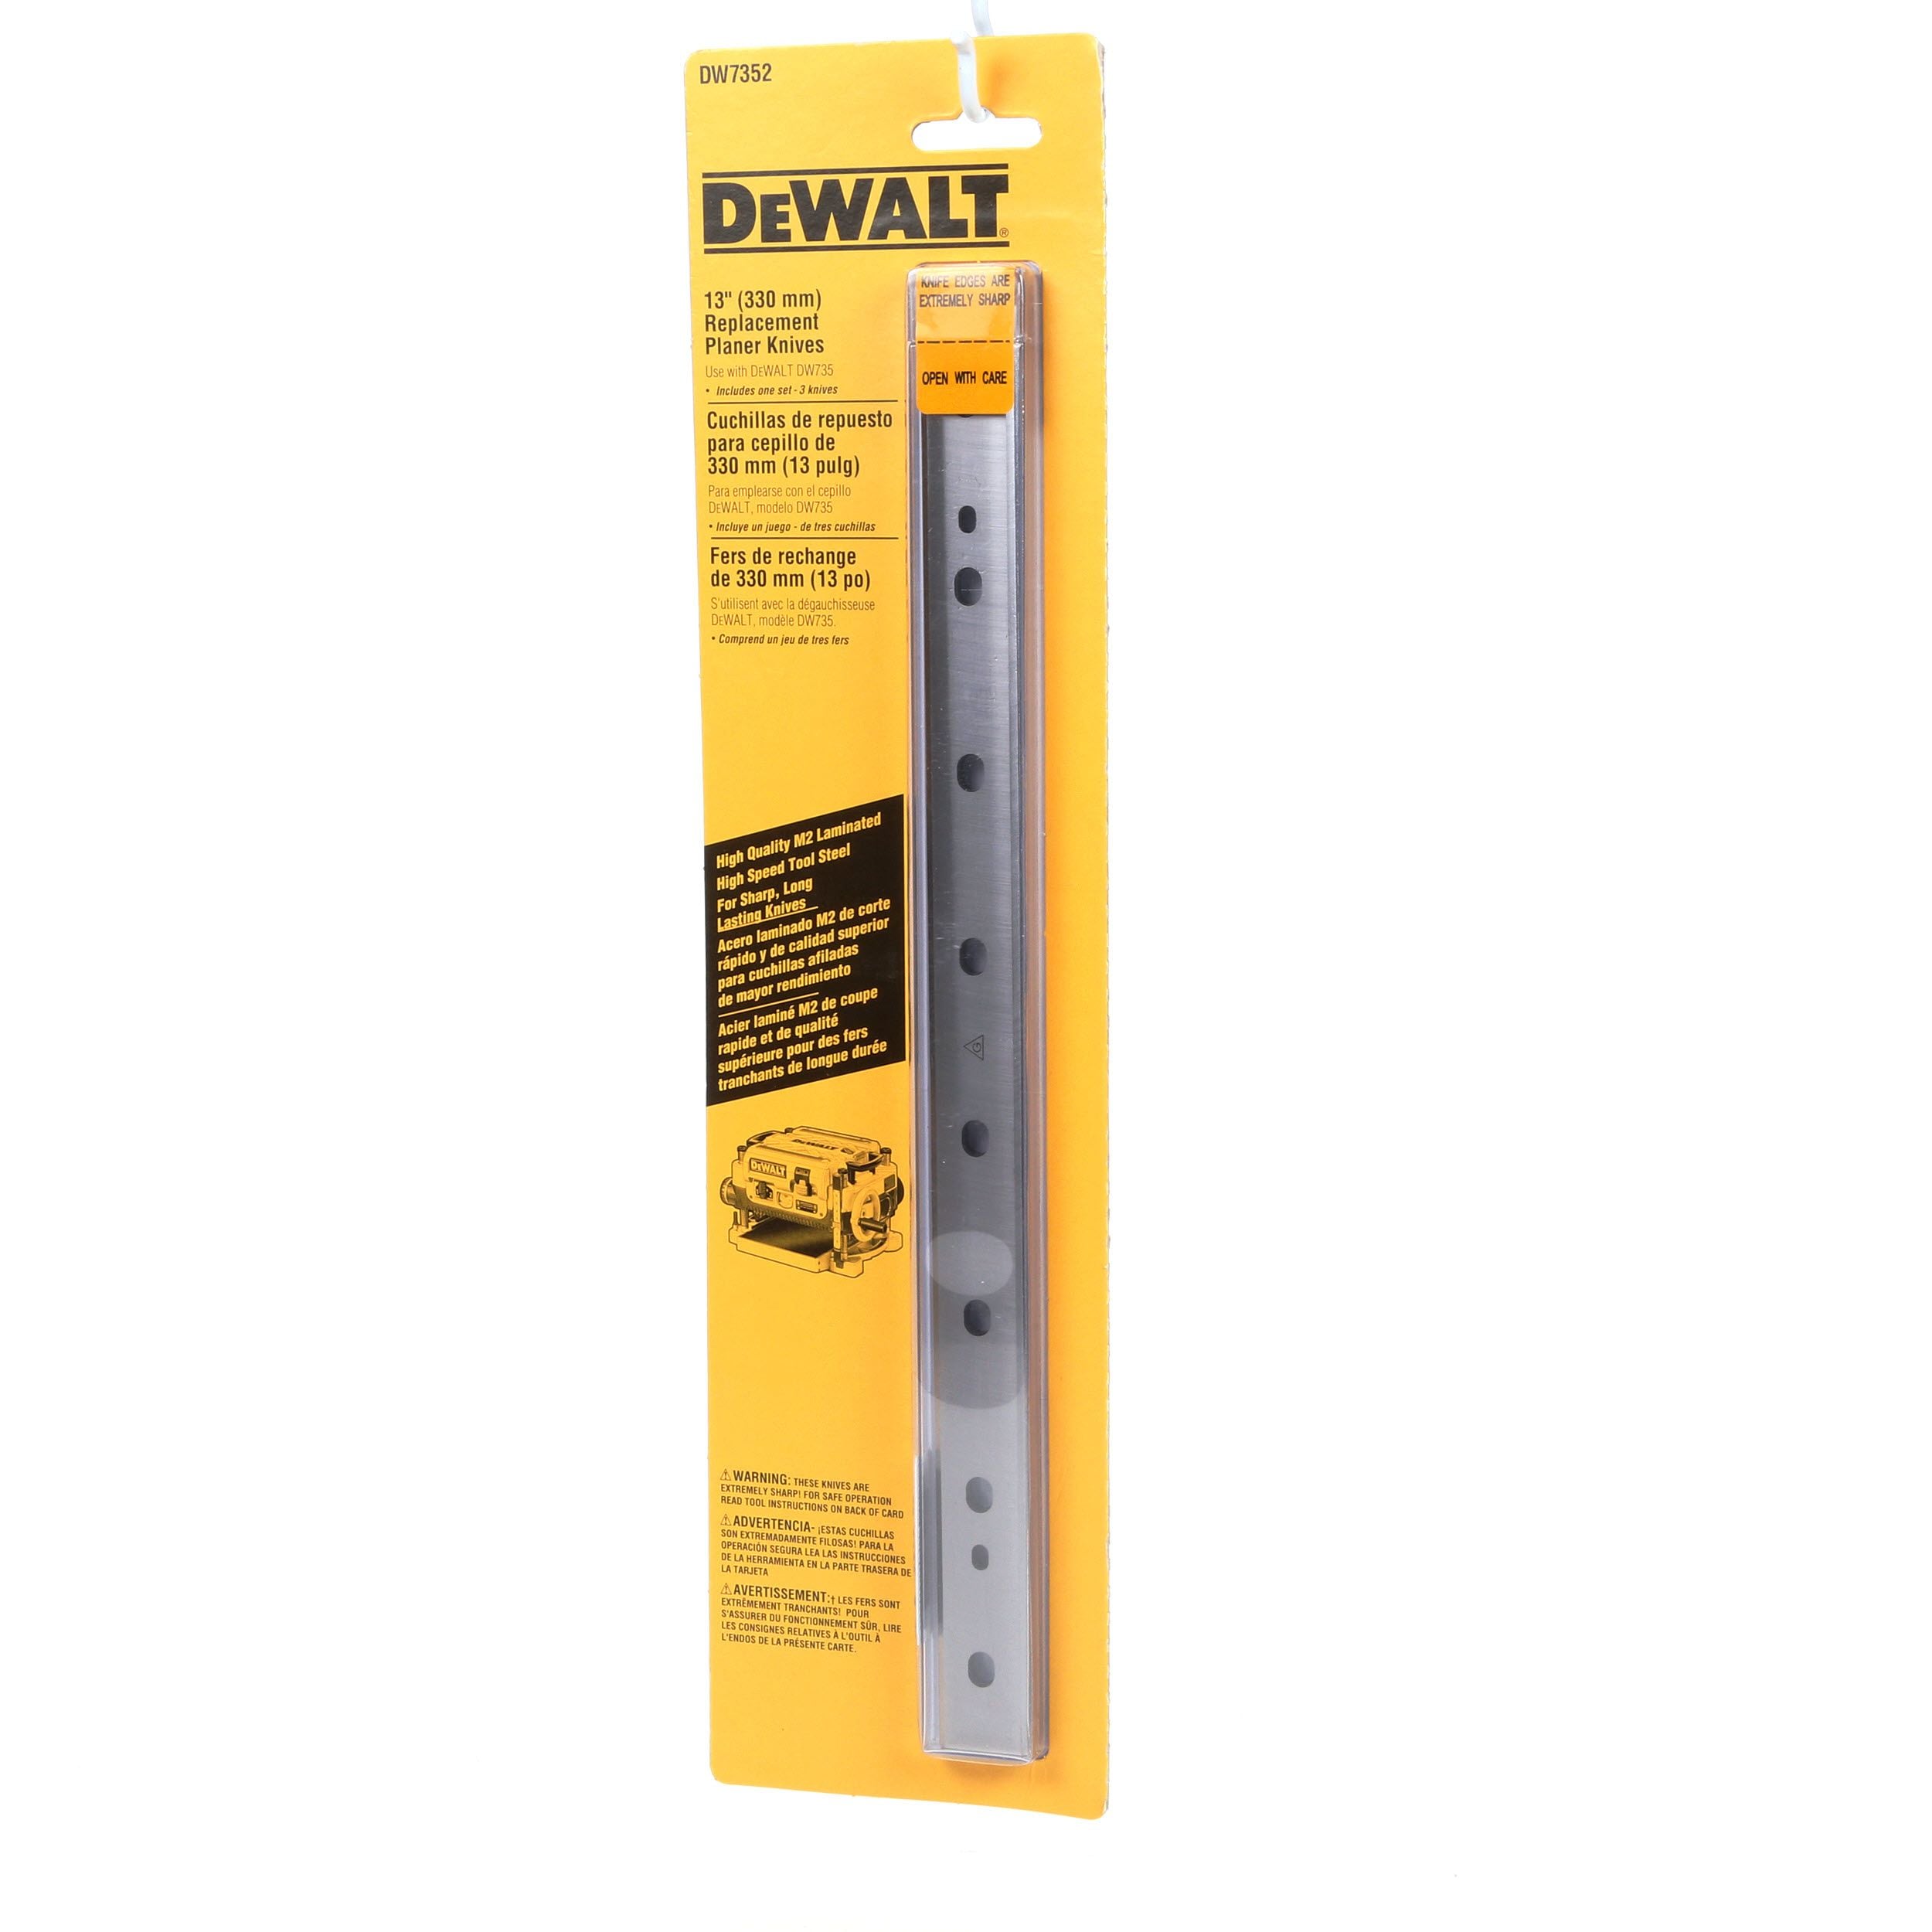 DEWALT Planer Knives the Benchtop & Stationary Tool Accessories department Lowes.com